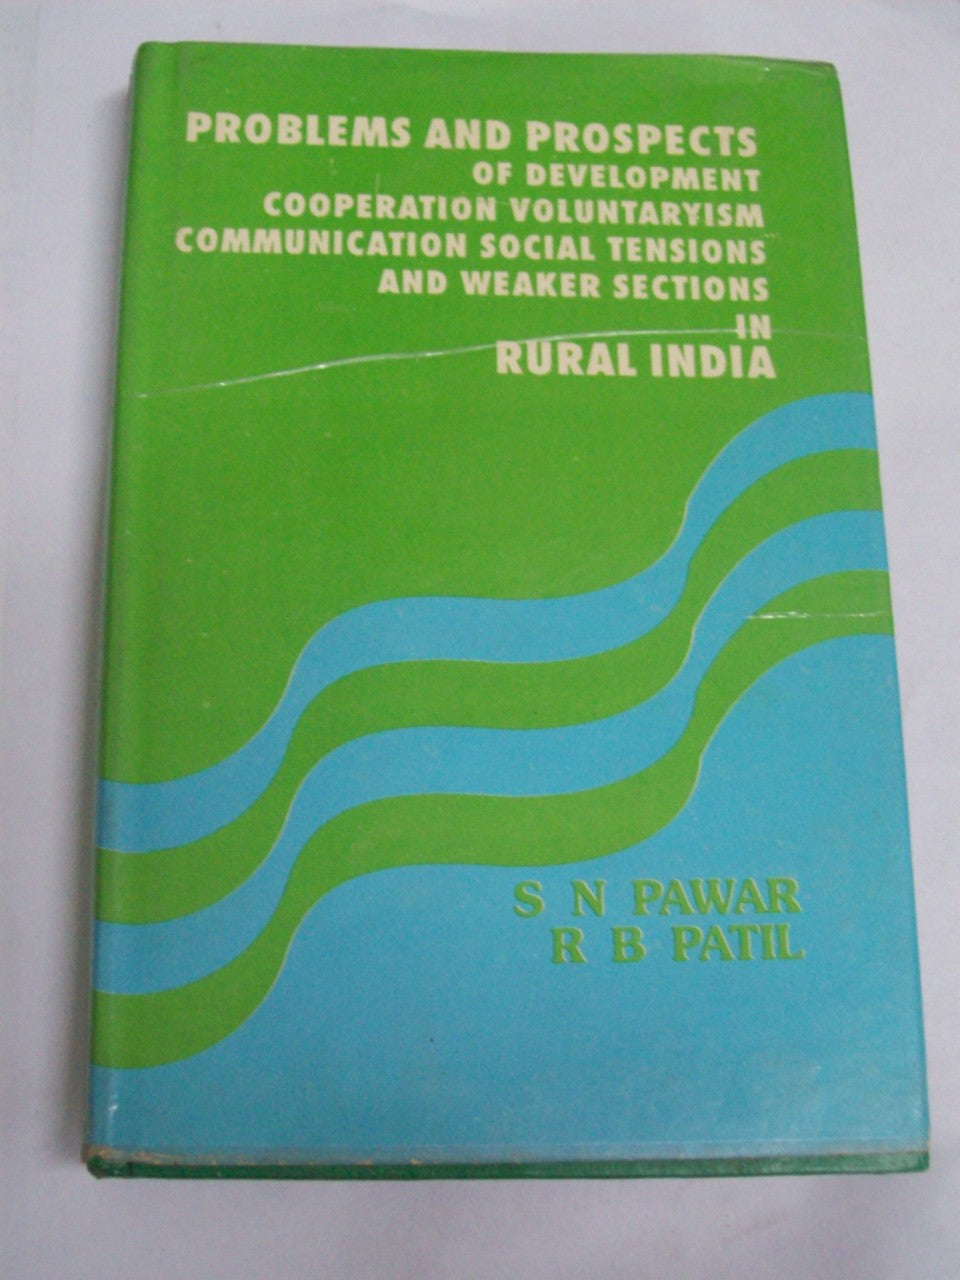 Problem And Prospects Of Development, Cooperation, Voluntaryism, Communication, Social Tensions, And Weaker Sections In Rural India